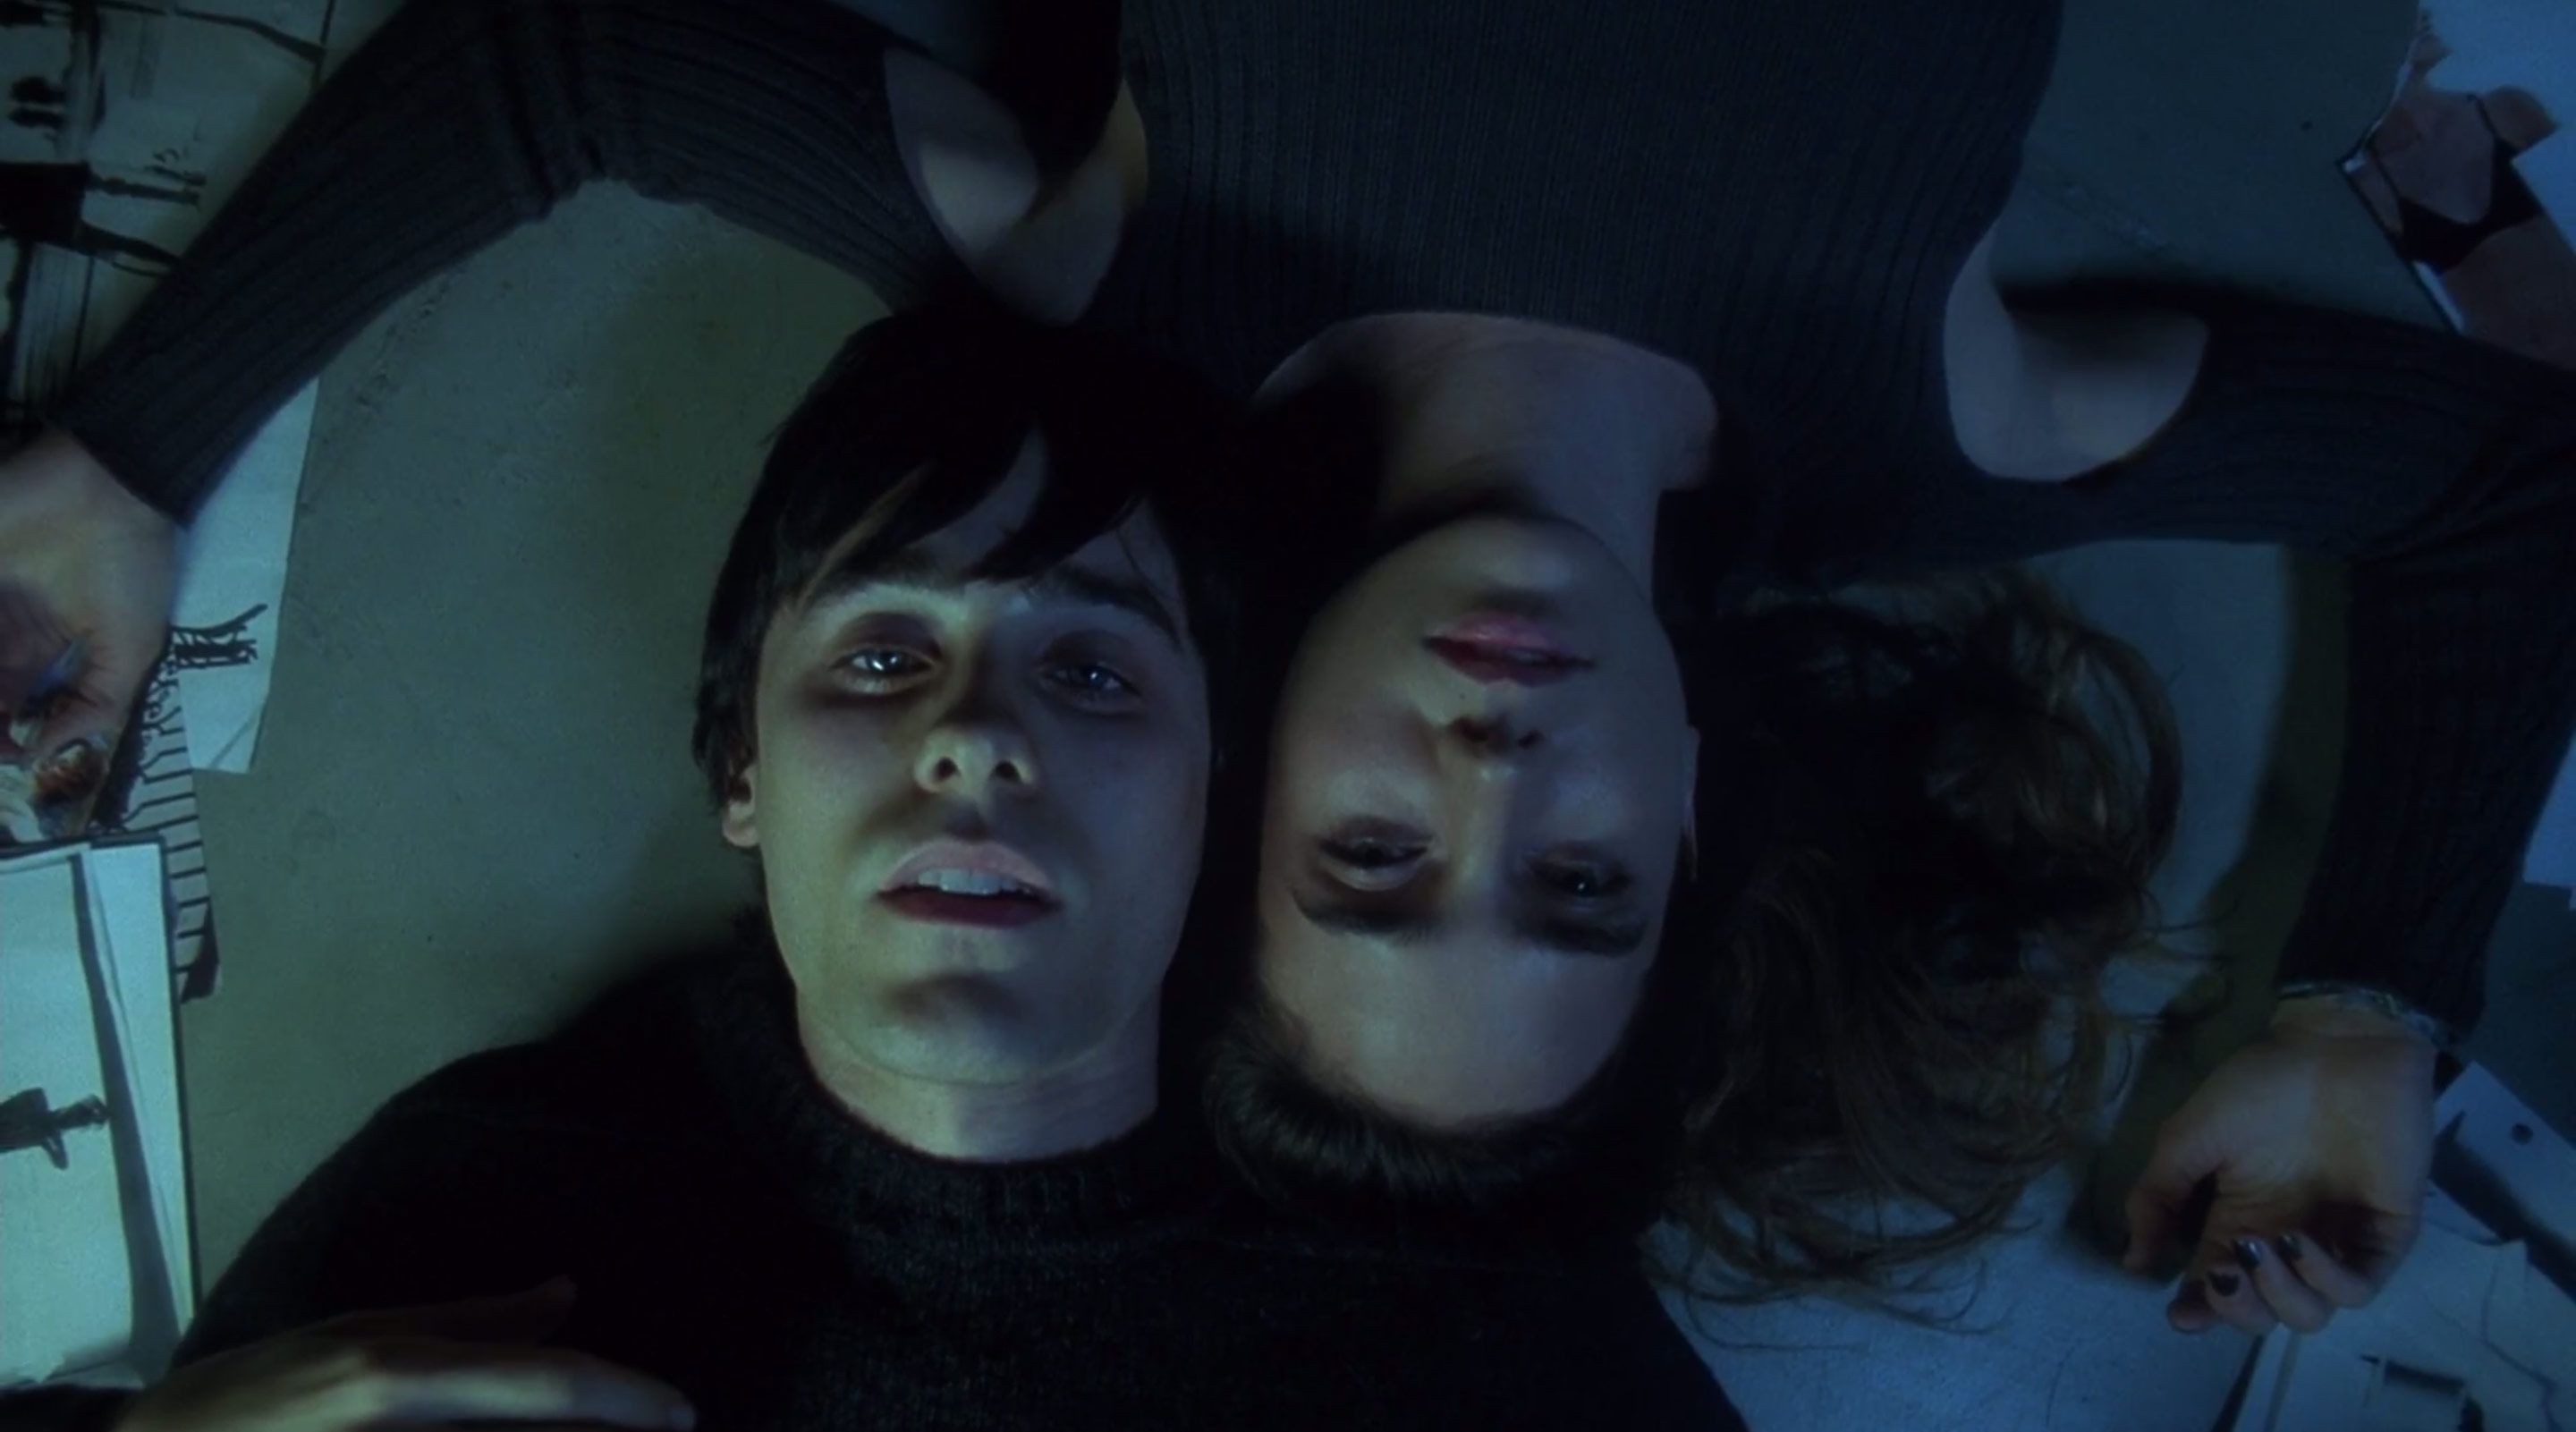 An Oral History of Requiem for a Dream